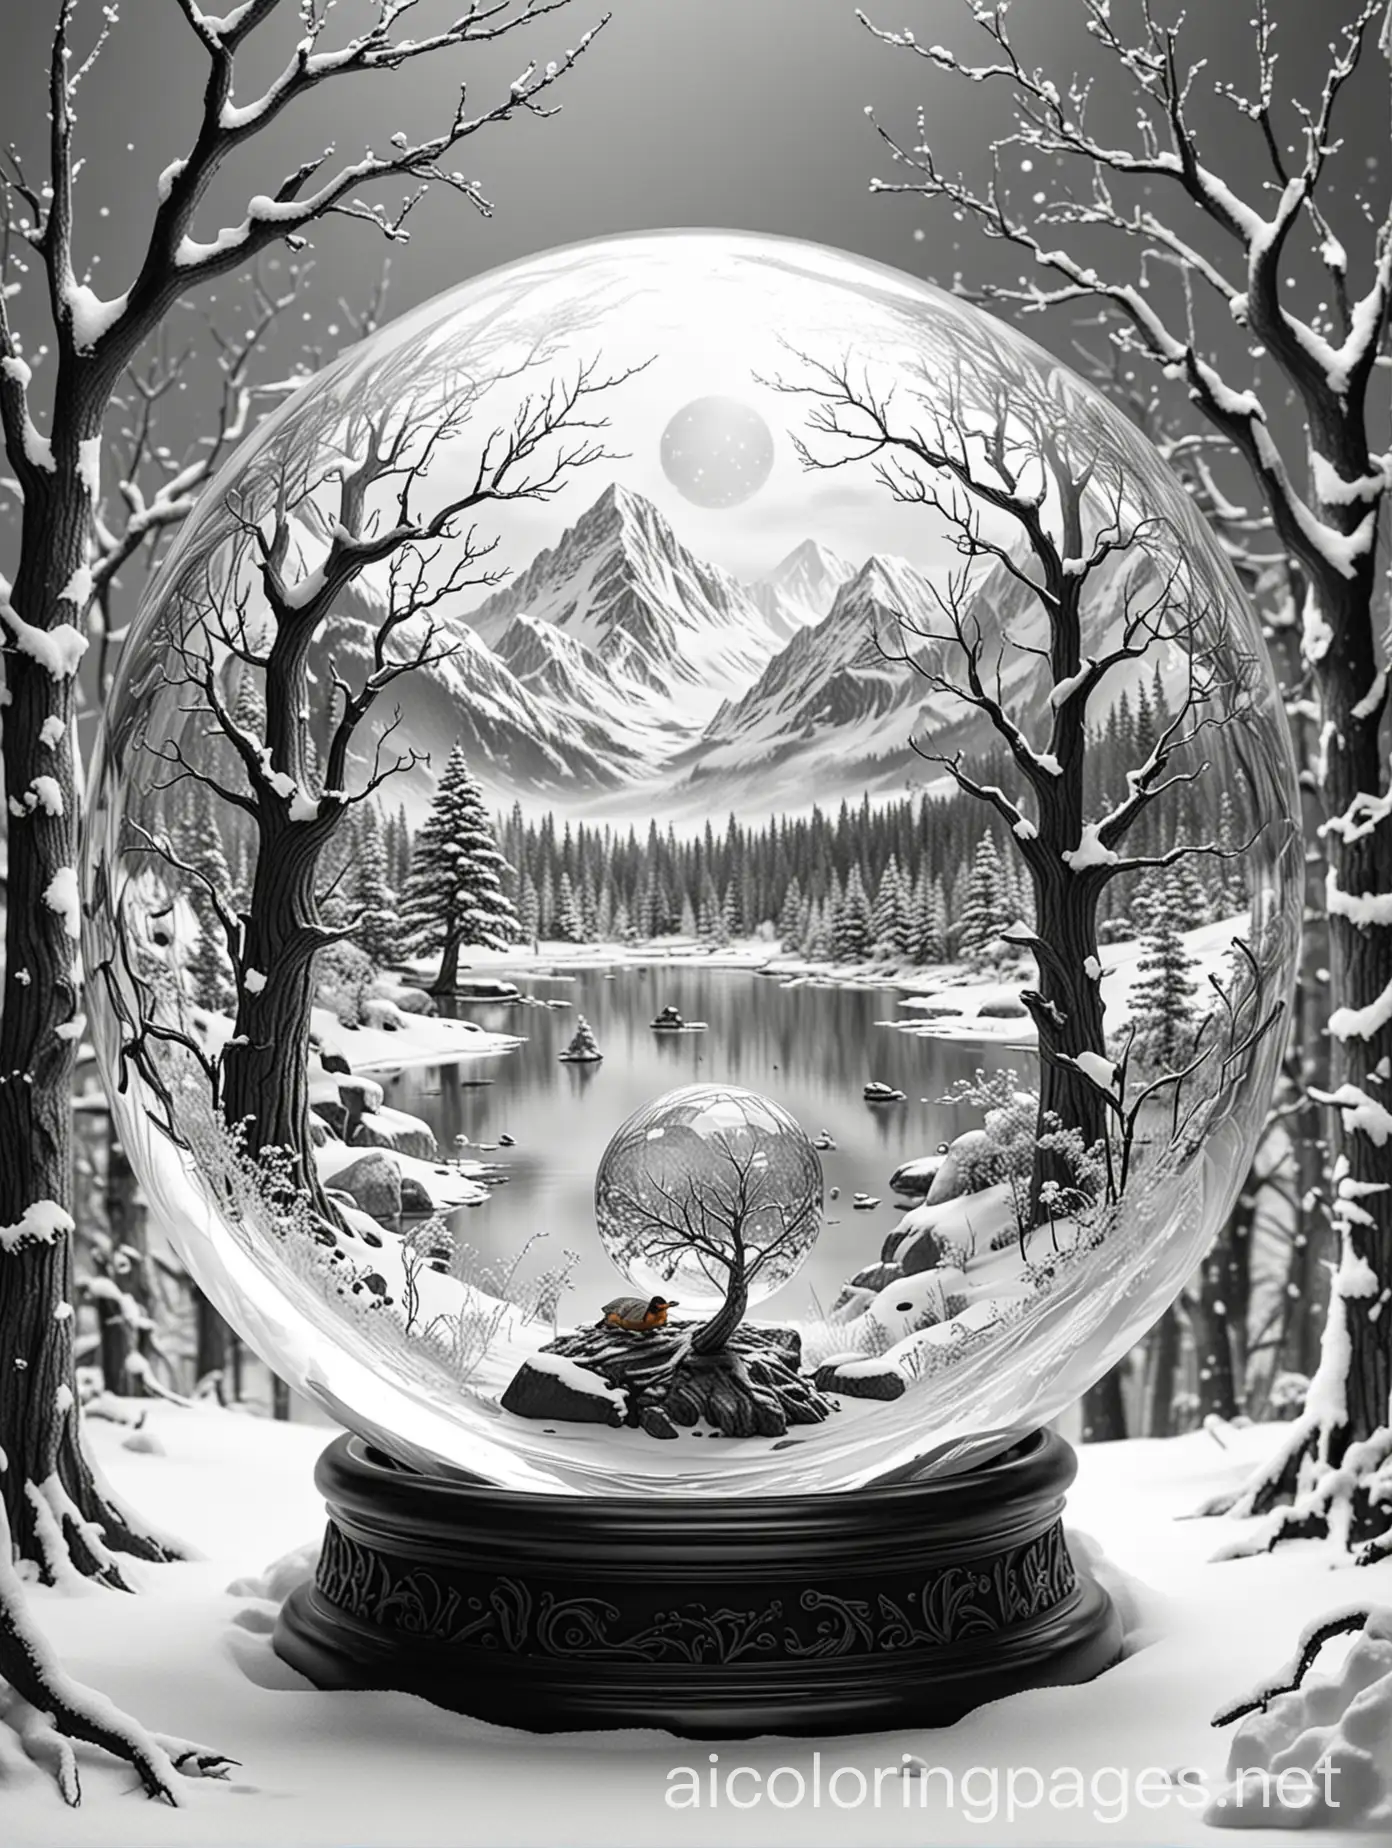 duck Inside a Crystal orb, . A twisted tree holds the crystal ball in  its branches. background is jagged snowy mountains, Coloring Page, black and white, line art, white background, Simplicity, Ample White Space. The background of the coloring page is plain white to make it easy for young children to color within the lines. The outlines of all the subjects are easy to distinguish, making it simple for kids to color without too much difficulty